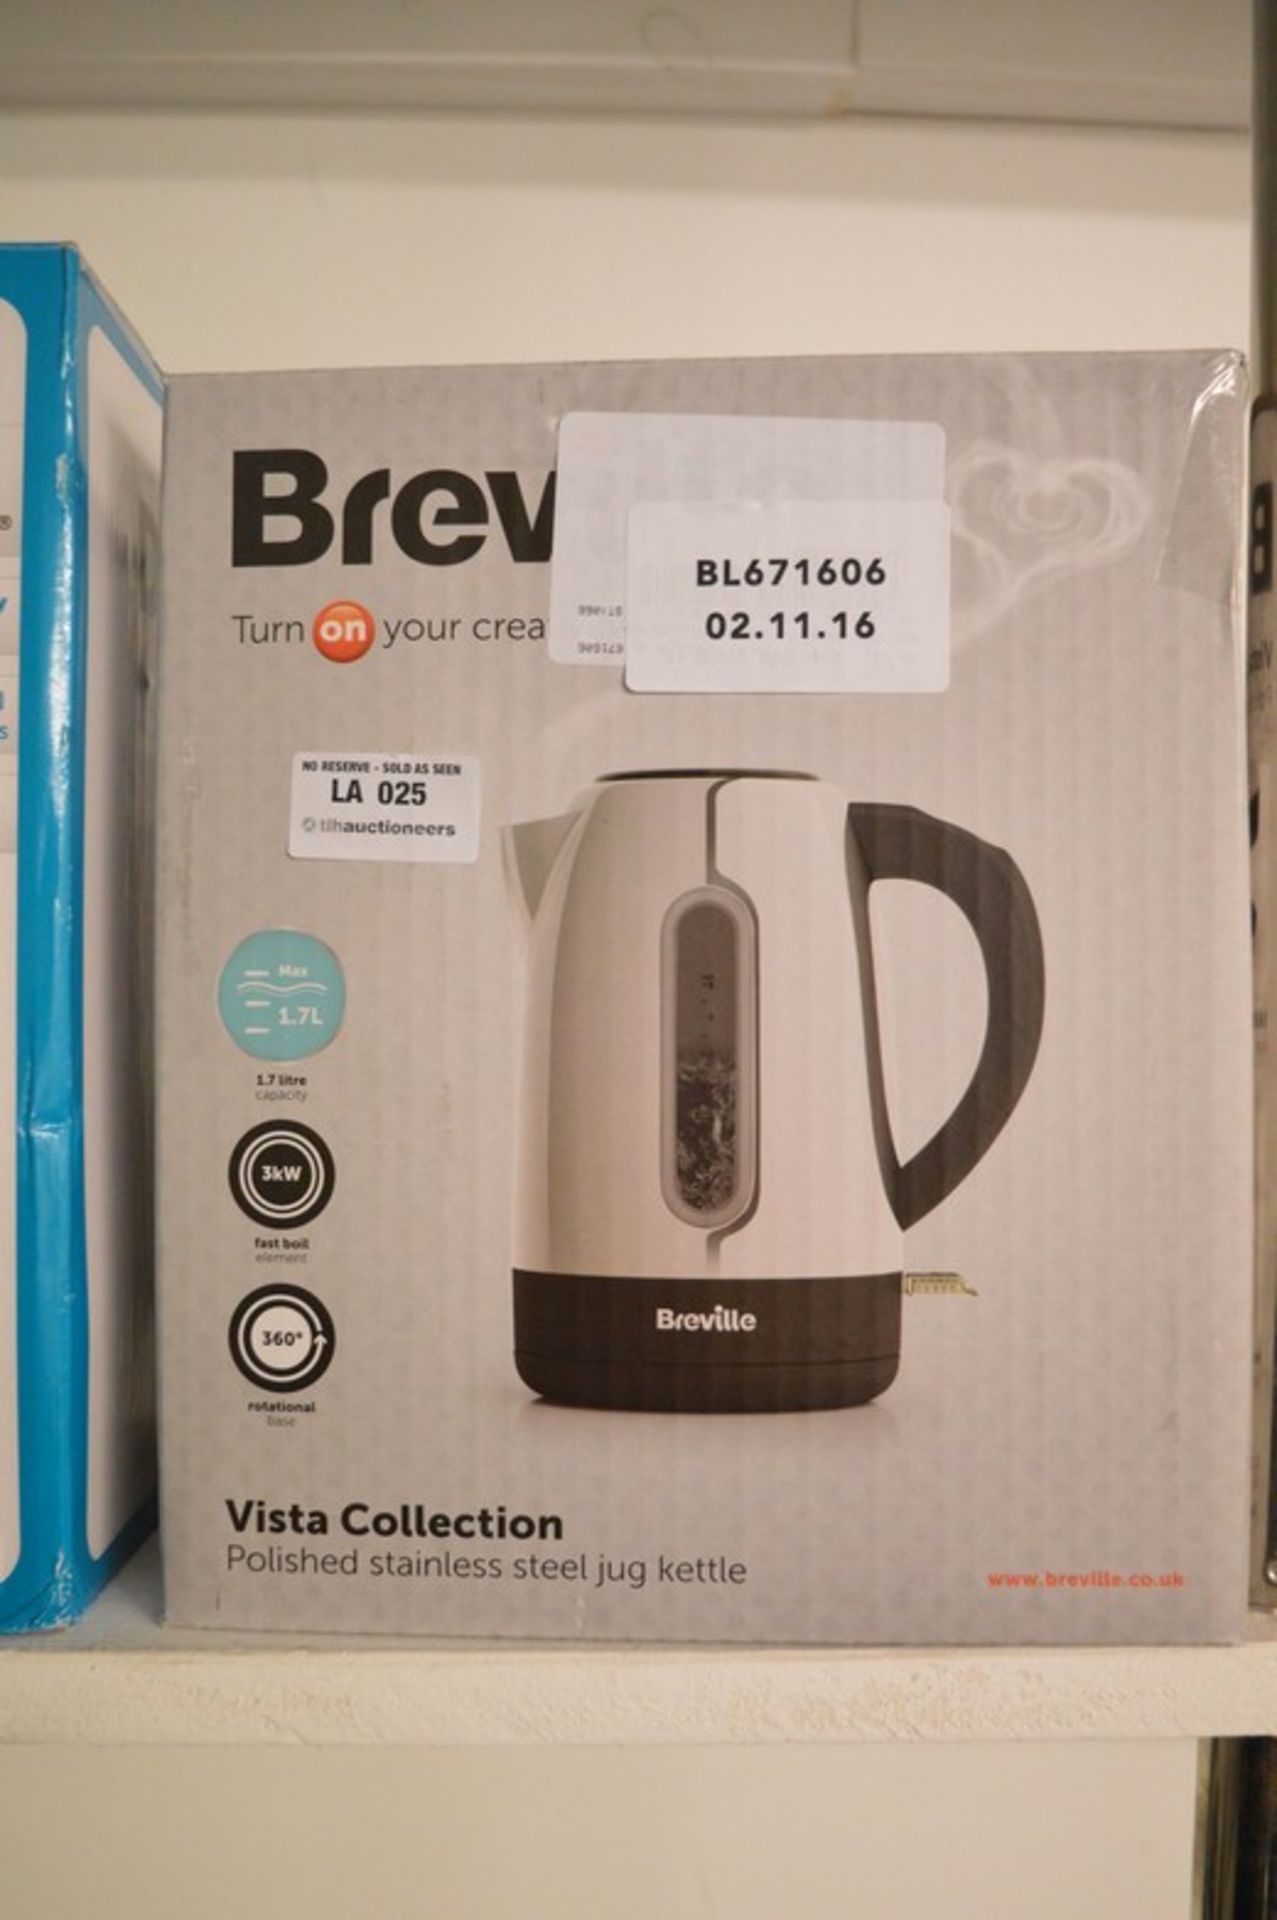 1 x BOXED BREVILLE 1.7 LITRE KETTLE RRP £35 02.11.16 *PLEASE NOTE THAT THE BID PRICE IS MULTIPLIED